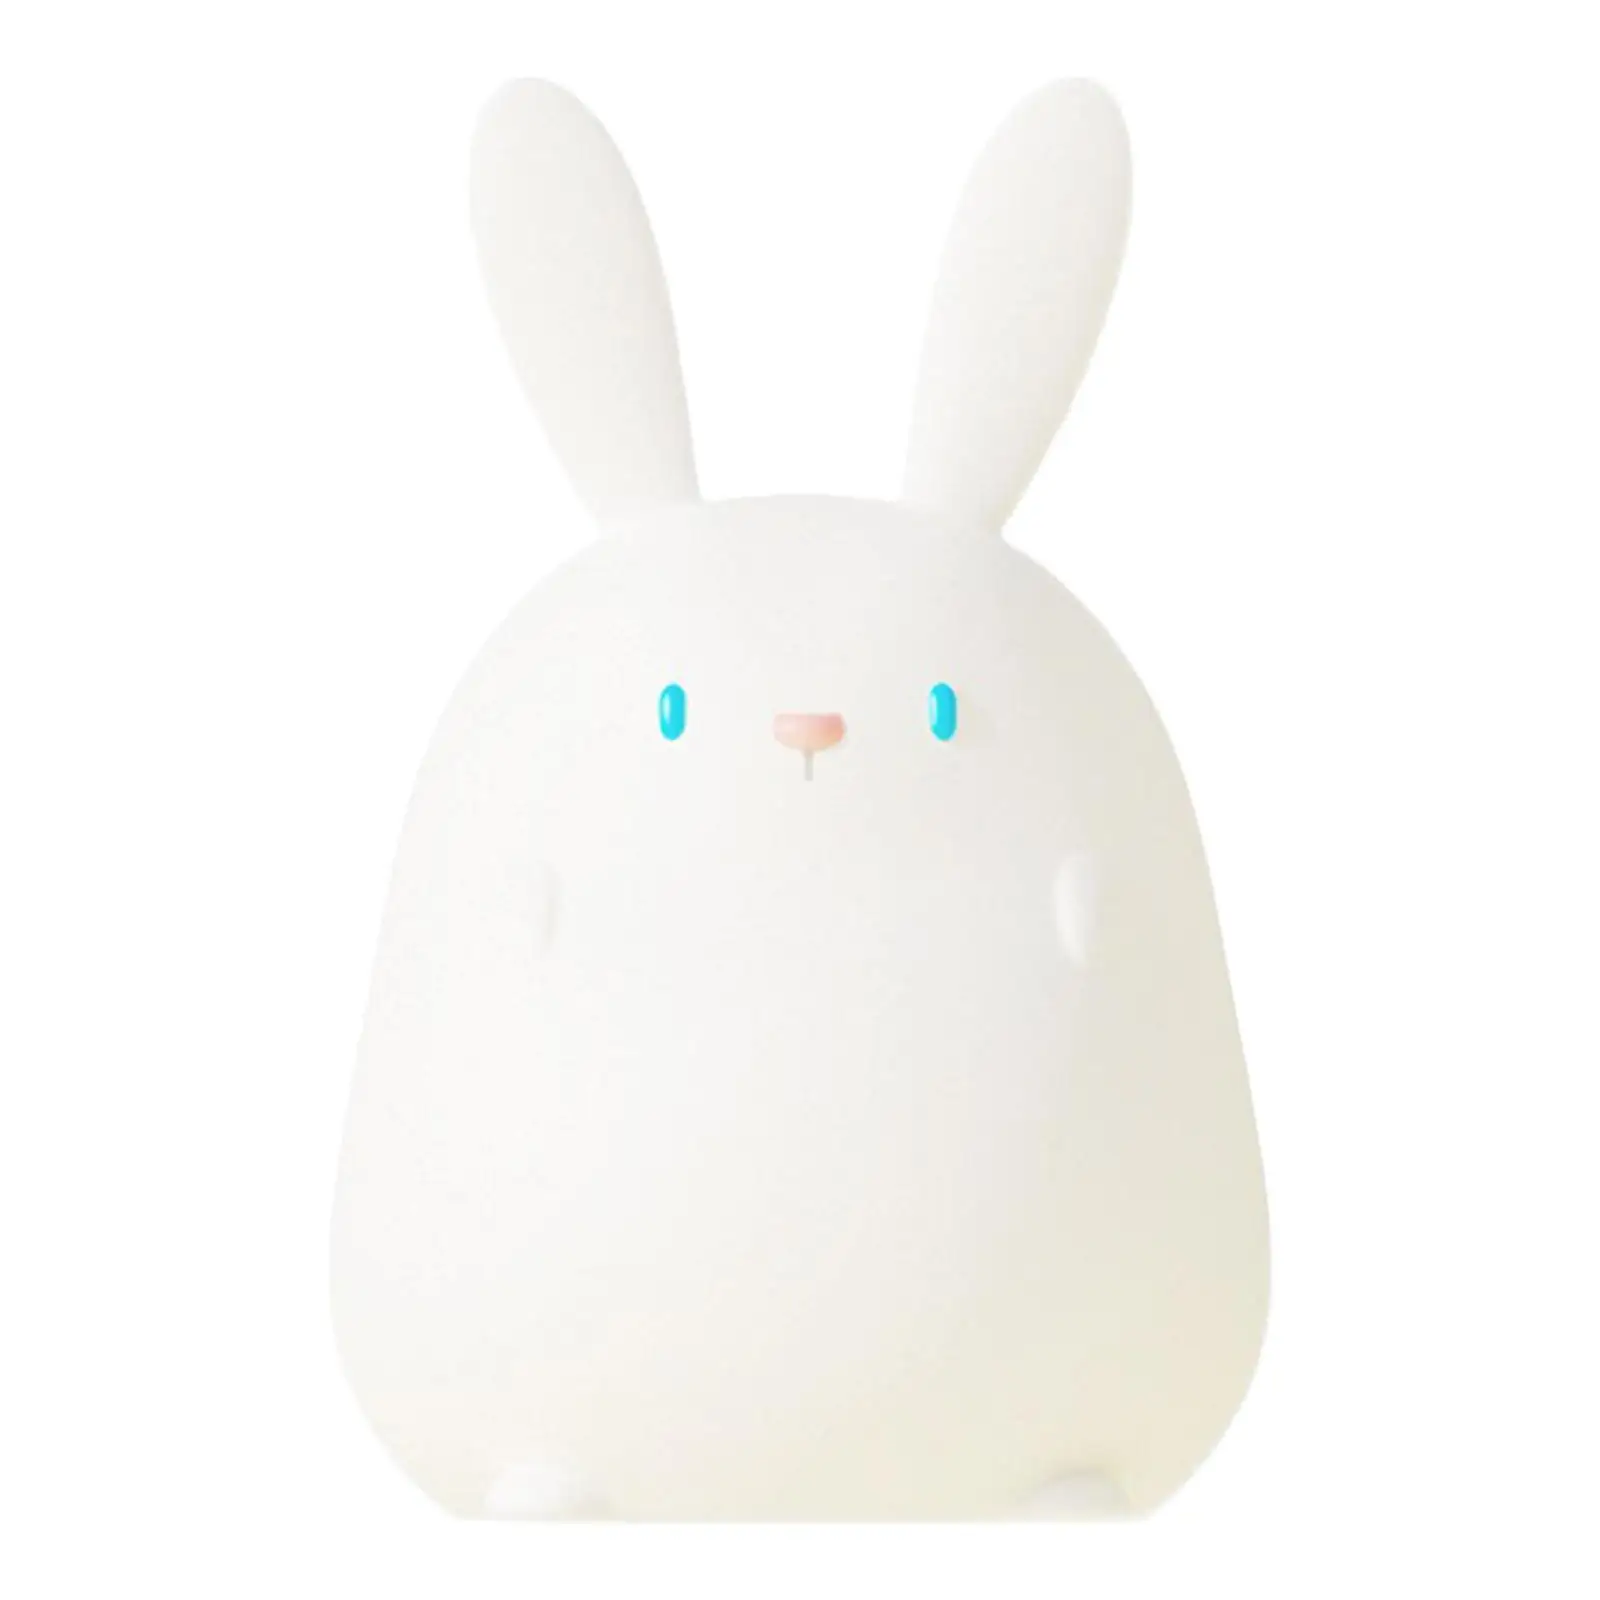 Silicone Night Light Decoration Rabbit USB Ornament Timing Nightlight Bedside Lamp for Tabletop Living Room Bedroom Centerpieces